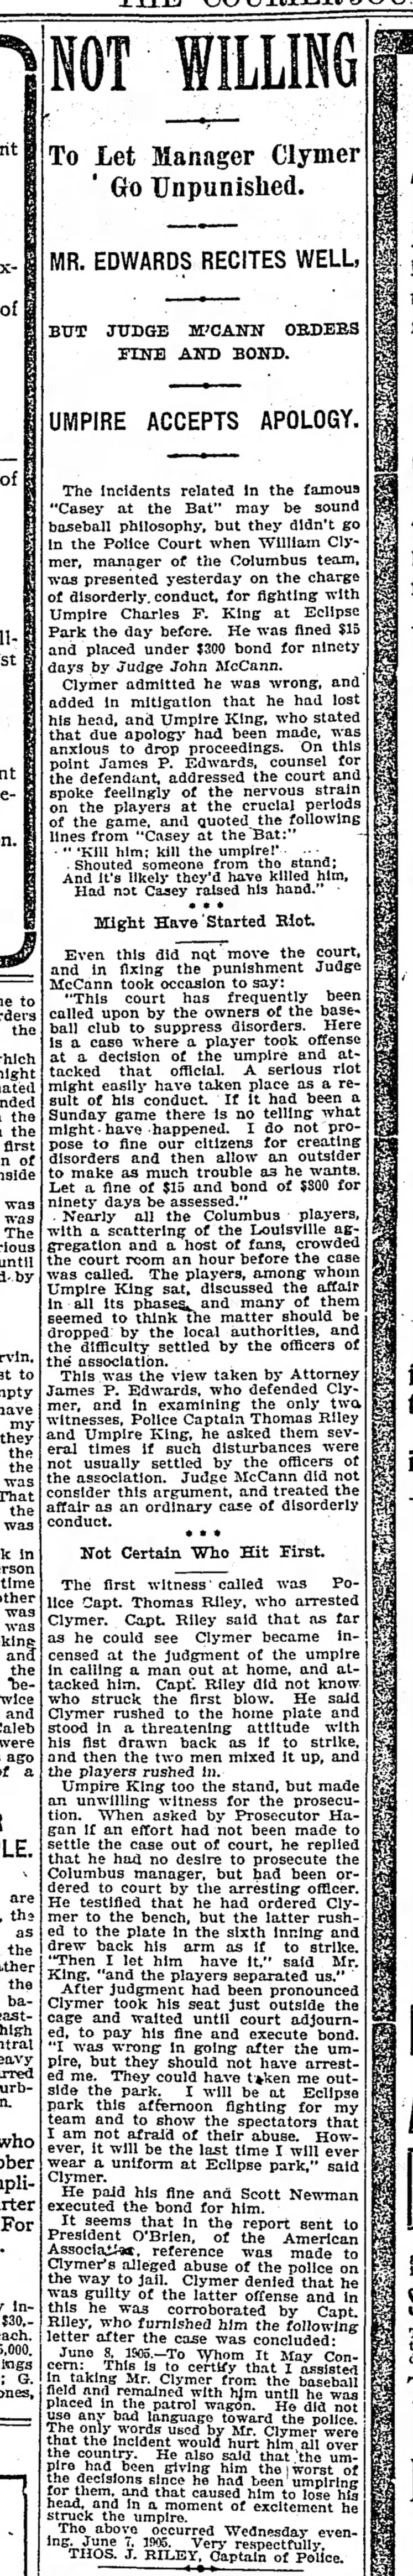 Threats to umpires 09 June 1905 Courier-Journal